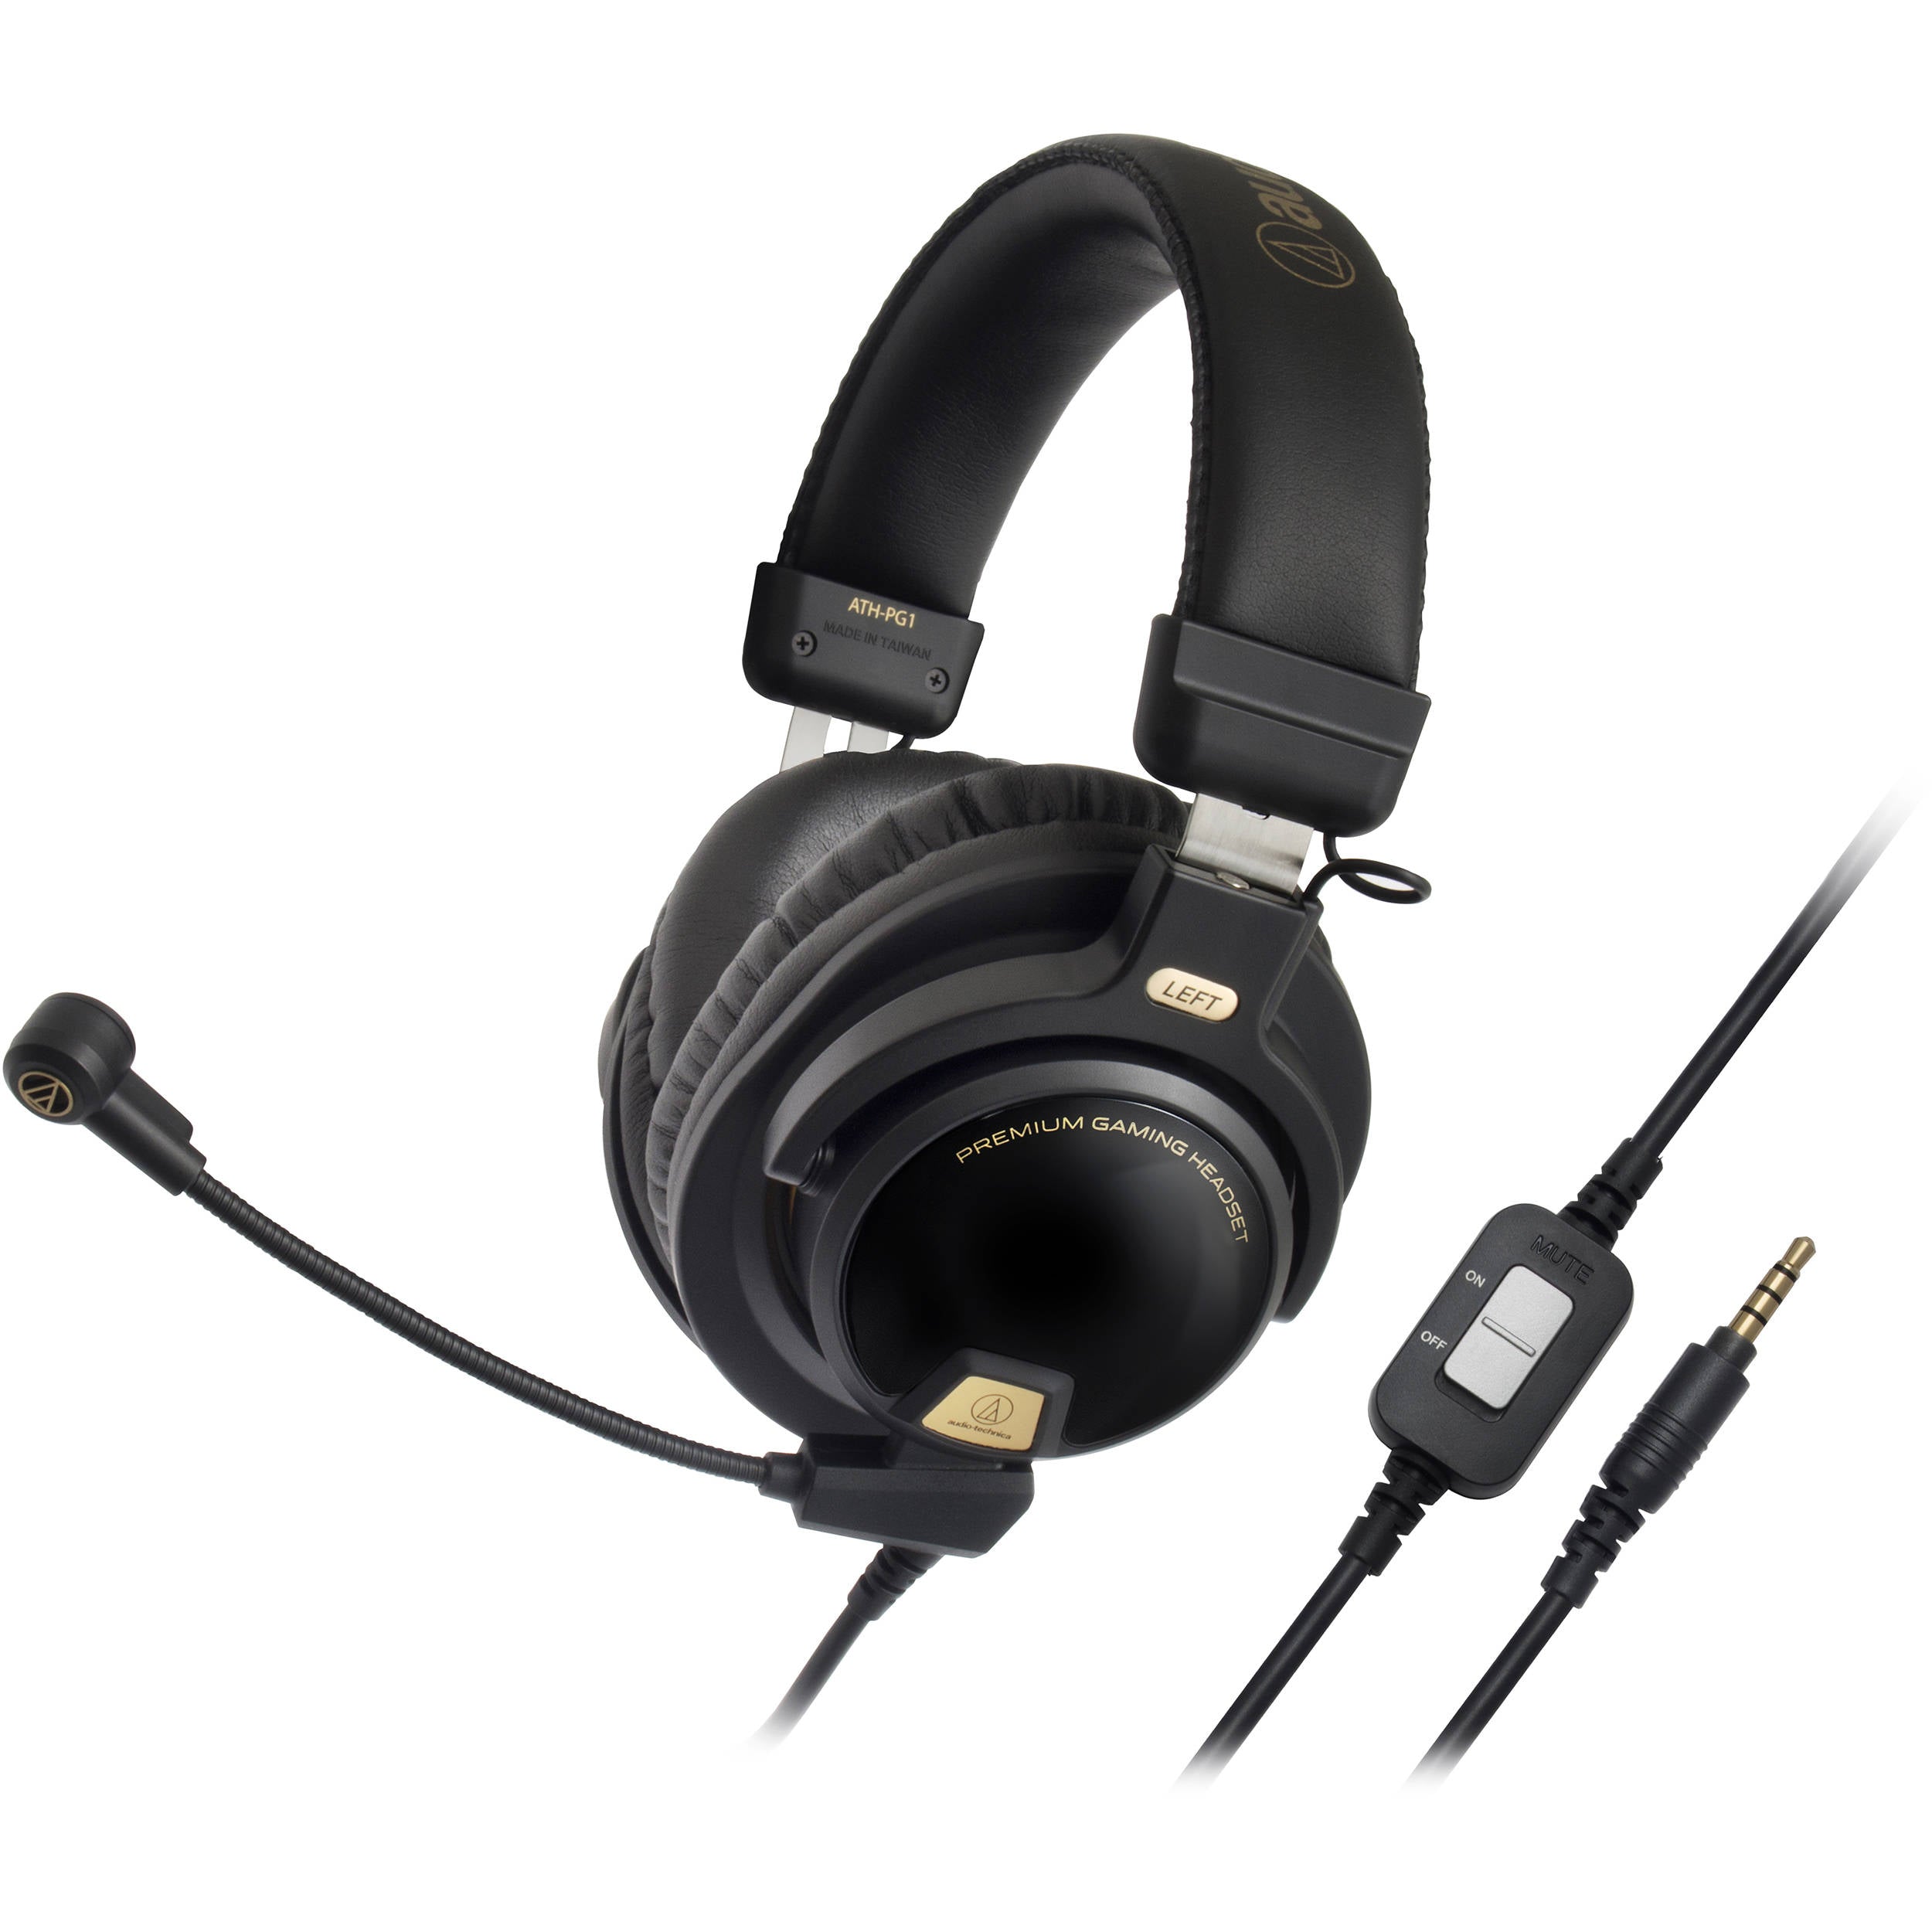 Audio-Technica ATH-PG1 Closed-Back Premium Gaming Headset with 6" Boom Microphone, Black